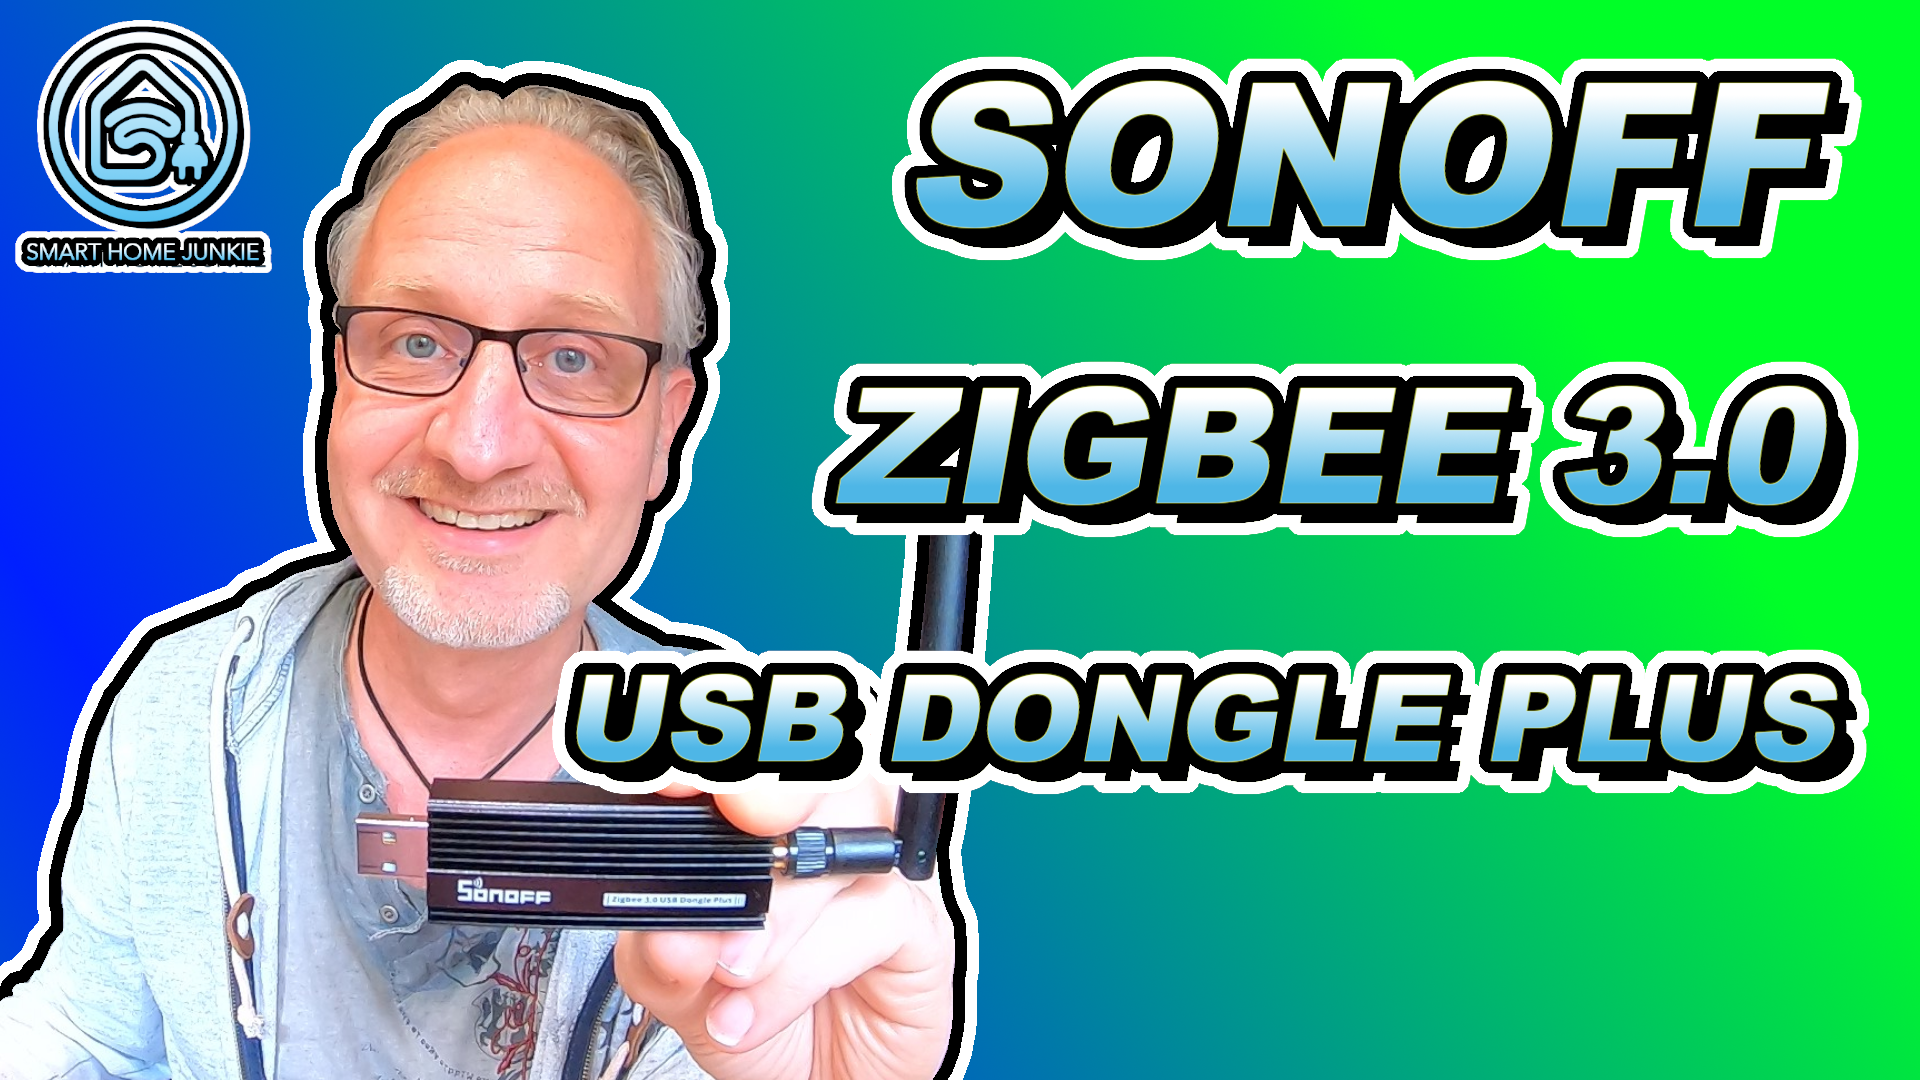 Sonoff Zigbee 3.0 USB Dongle Plus – How to upgrade the firmware.